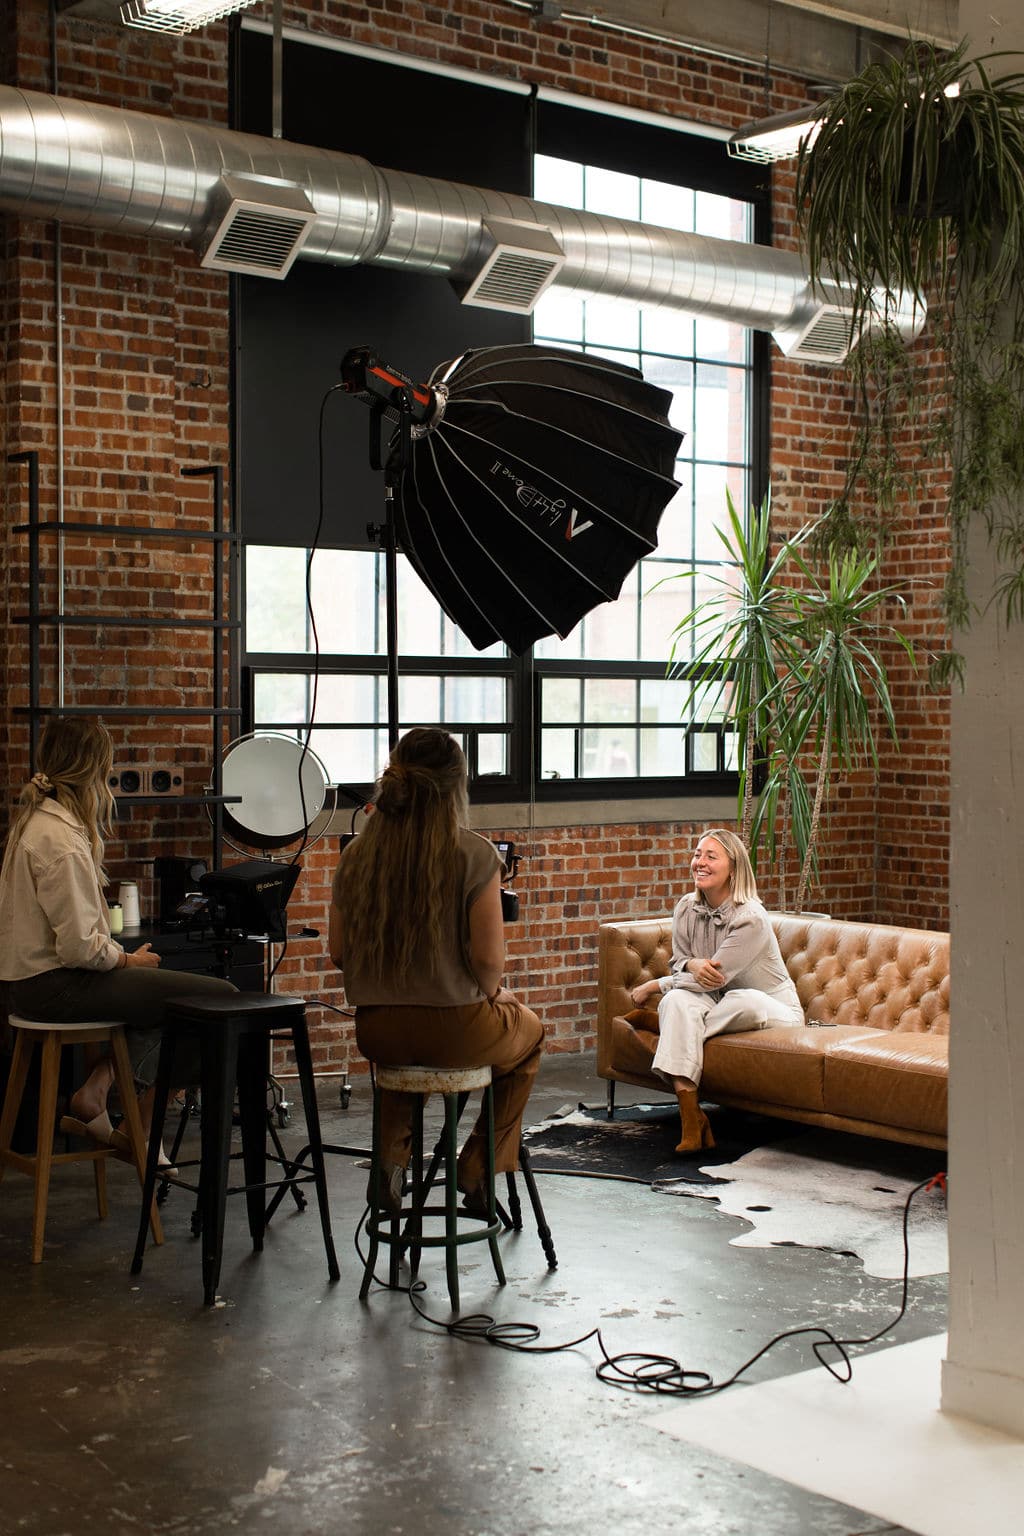 How a Business Videographer can Bring Your Marketing to The Next Level